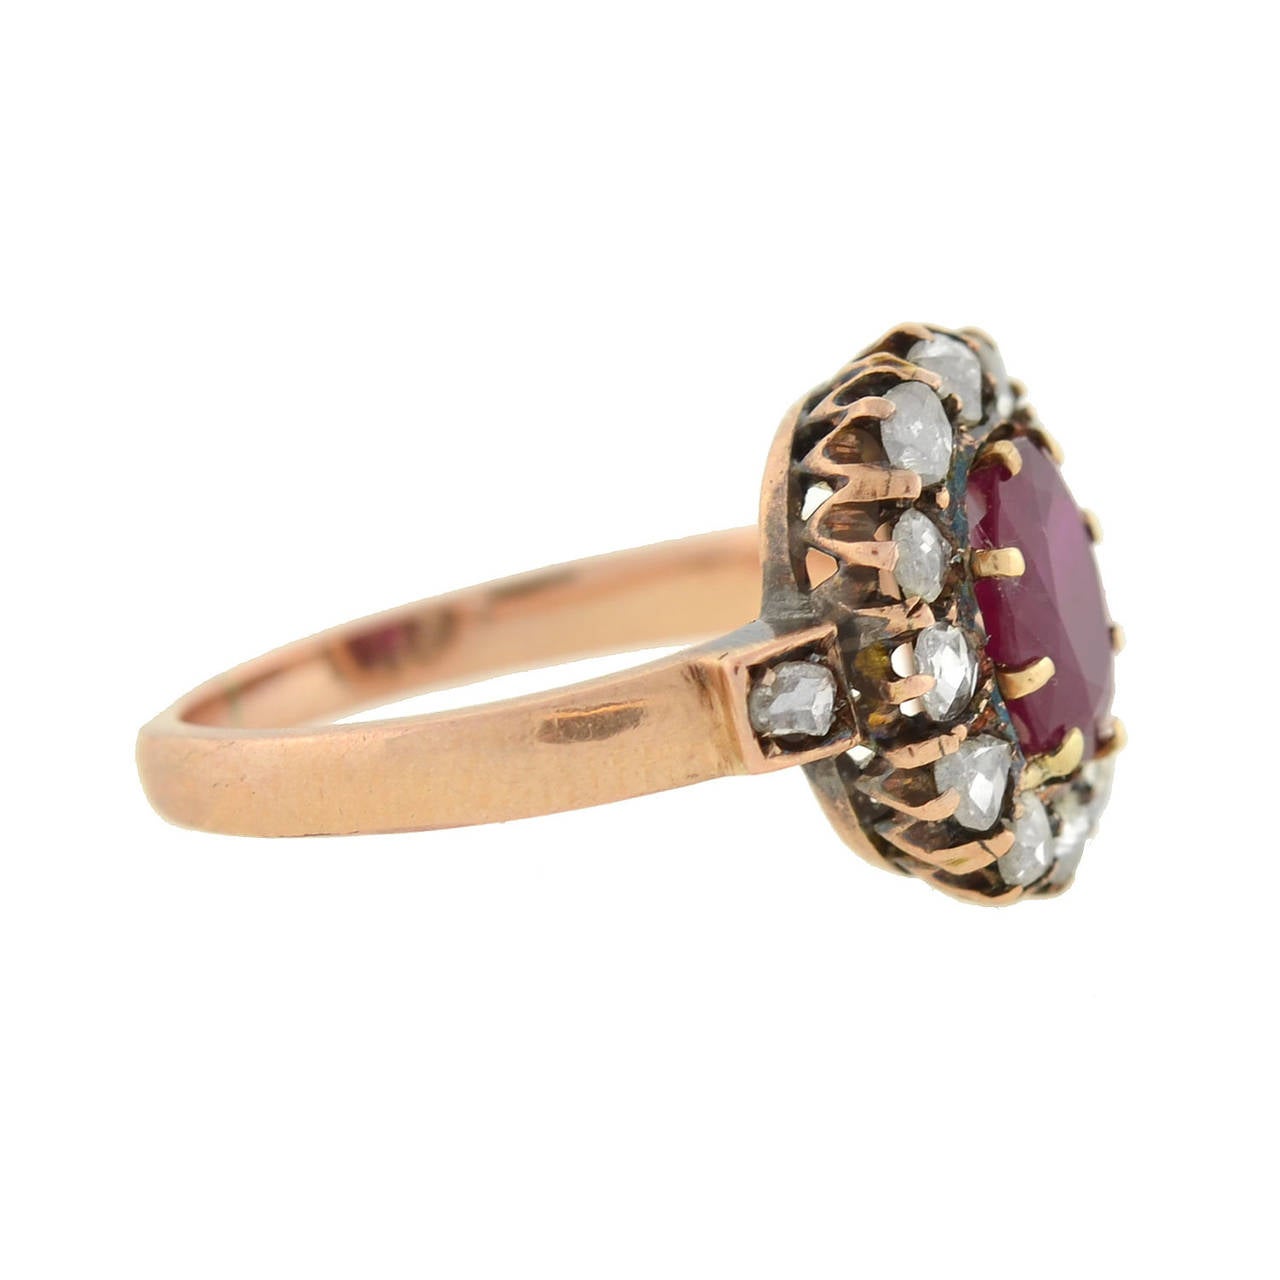 An absolutely gorgeous ruby and diamond ring from the Late Victorian (ca1900) era! Made of 14kt rosy yellow gold, the ring holds a natural oval cut Burmese ruby at the center, surrounded by 14 sparkling old Rose Cut diamonds. The ruby weighs 1.51ct